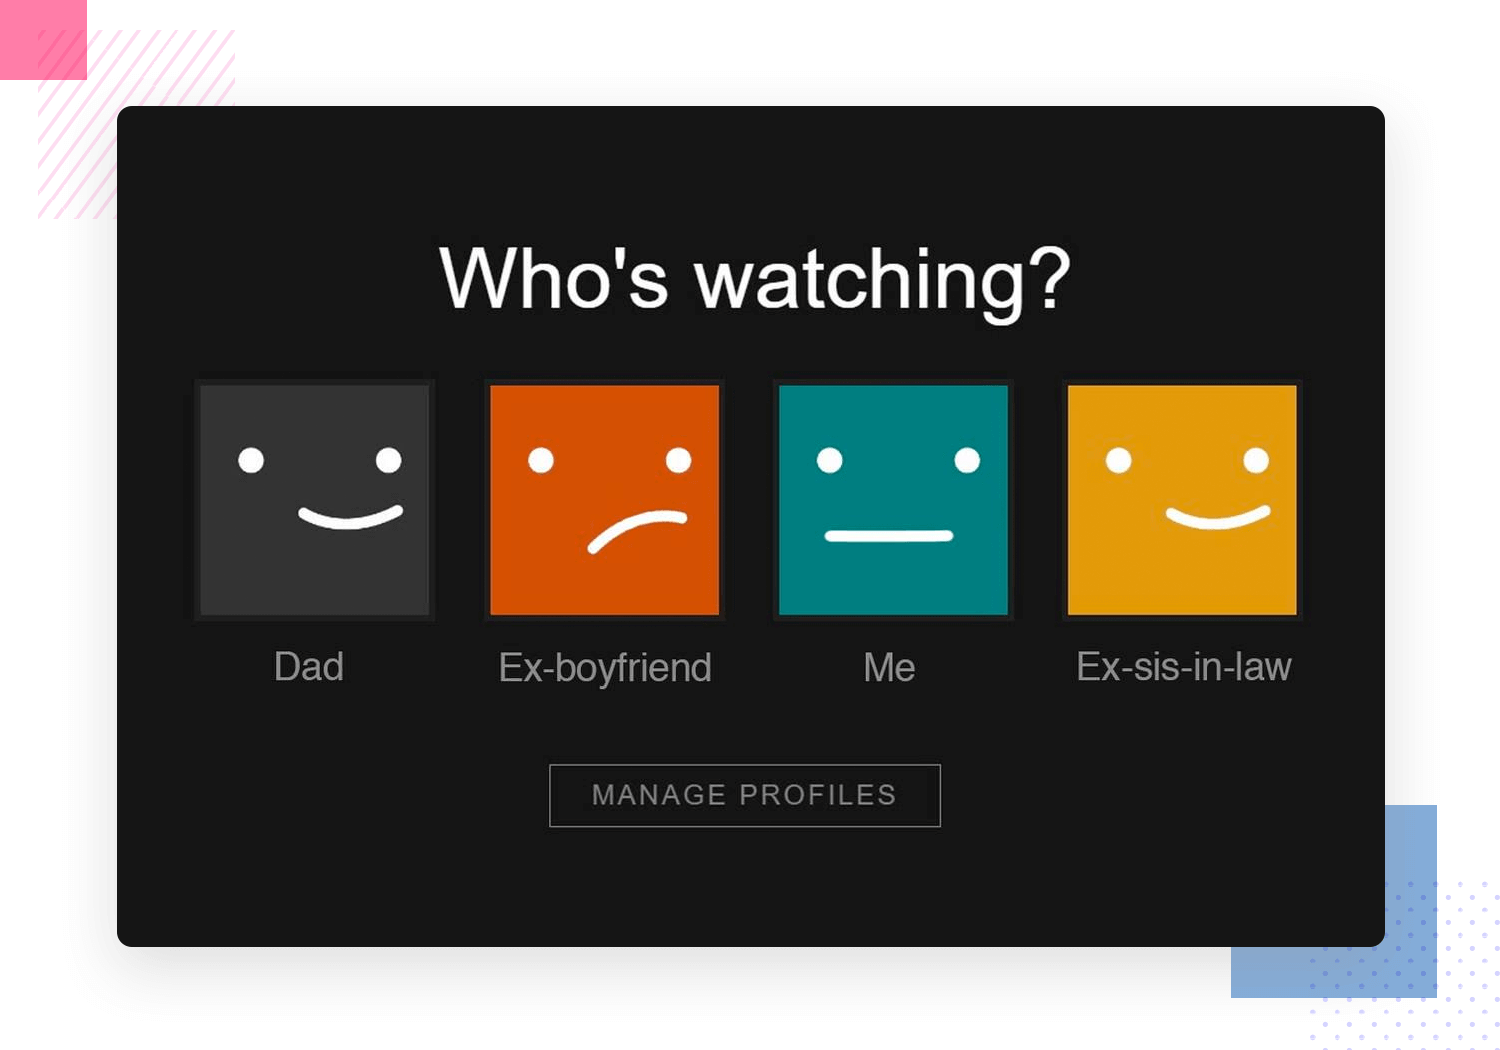 UX writing - Netflix using questions instead of commands